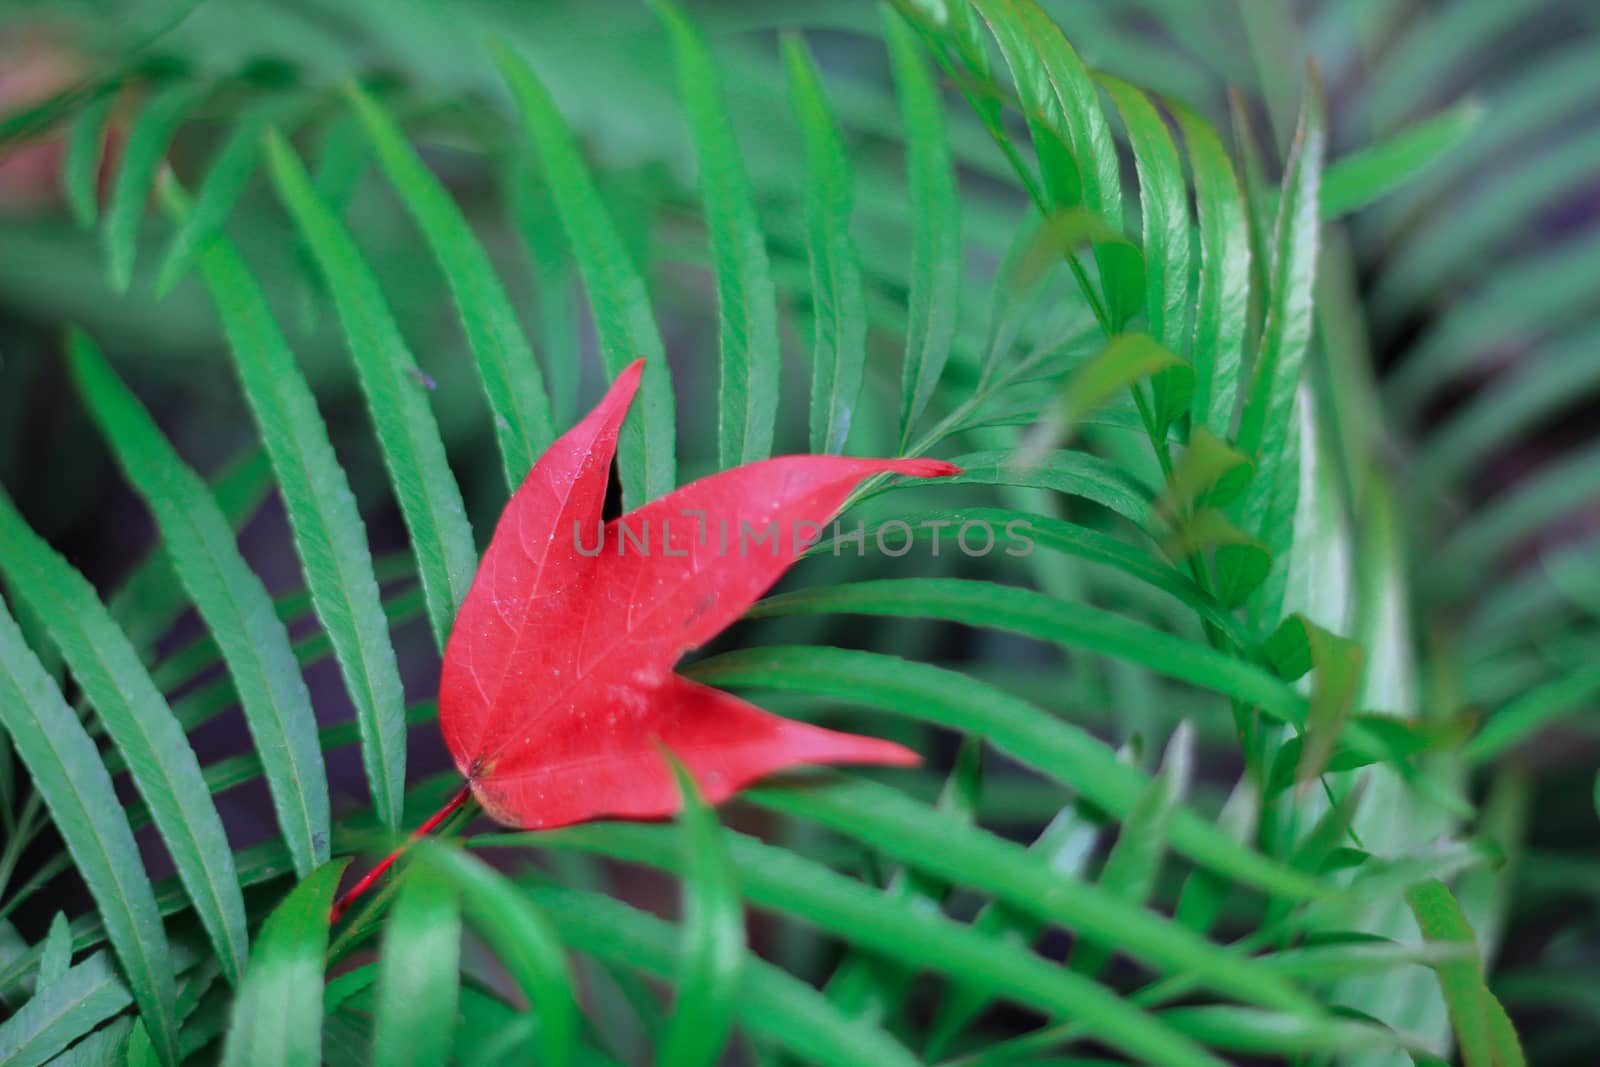 Bright red maple leaves in winter at Phu Kradueng National Park, Loei Province, Thailand.